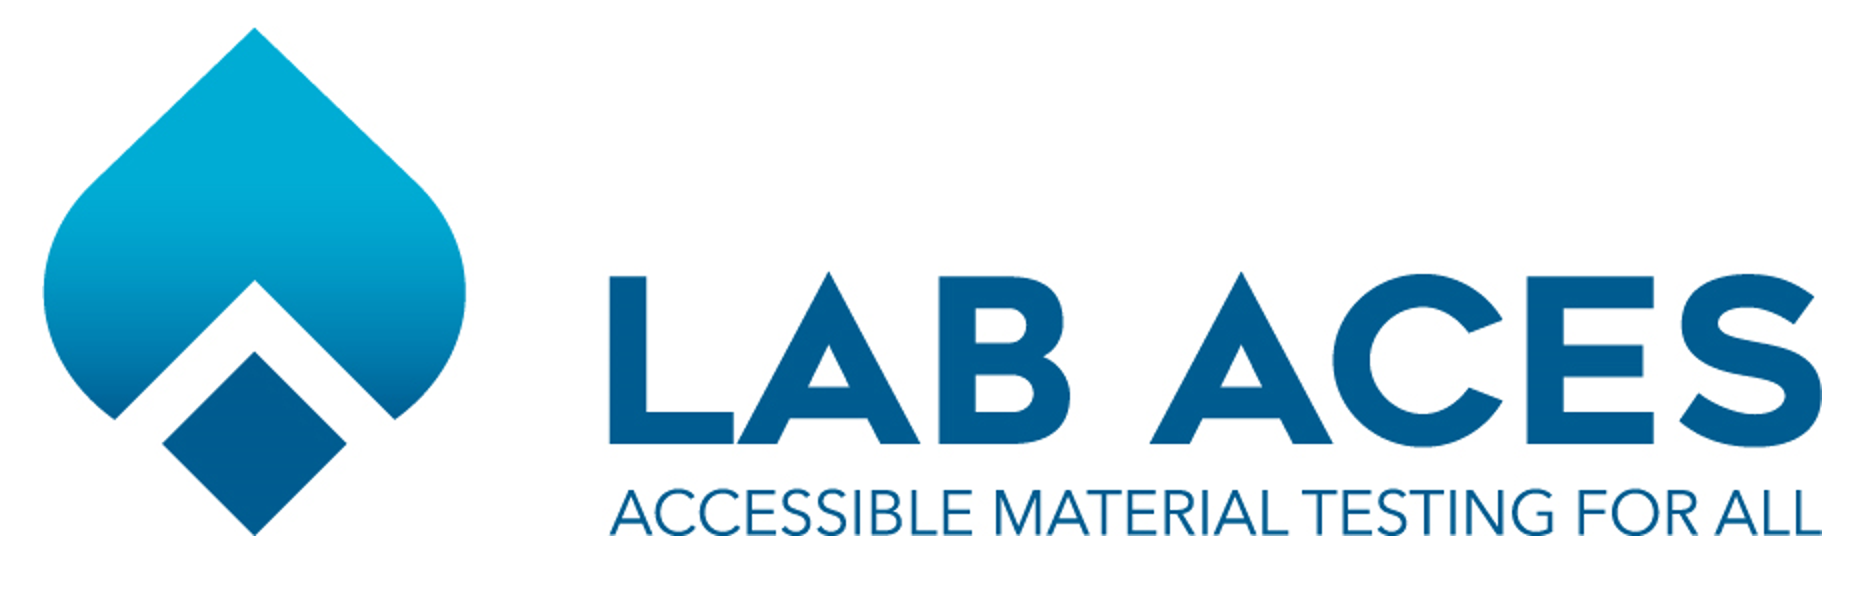 Lab Aces | Laboratory facilities | Material testing